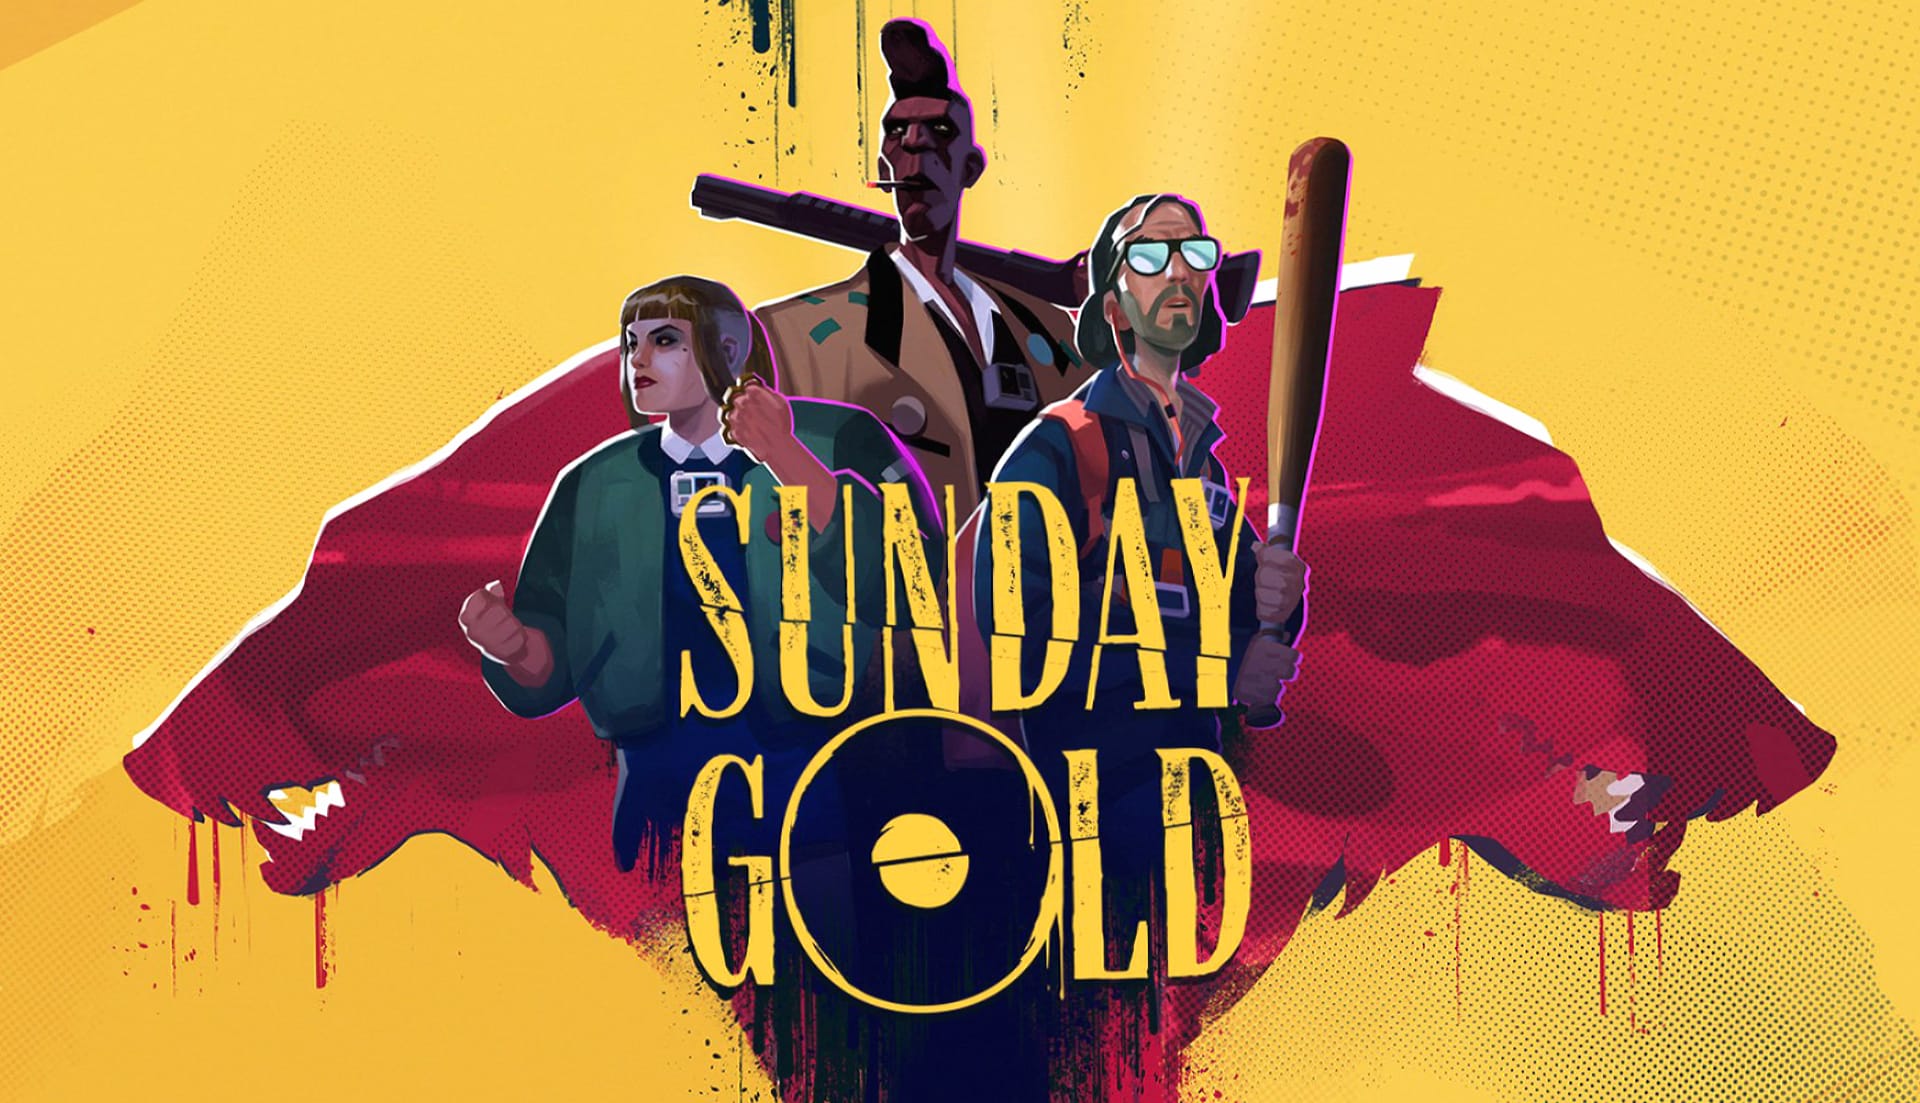 Sunday Gold wallpapers HD quality